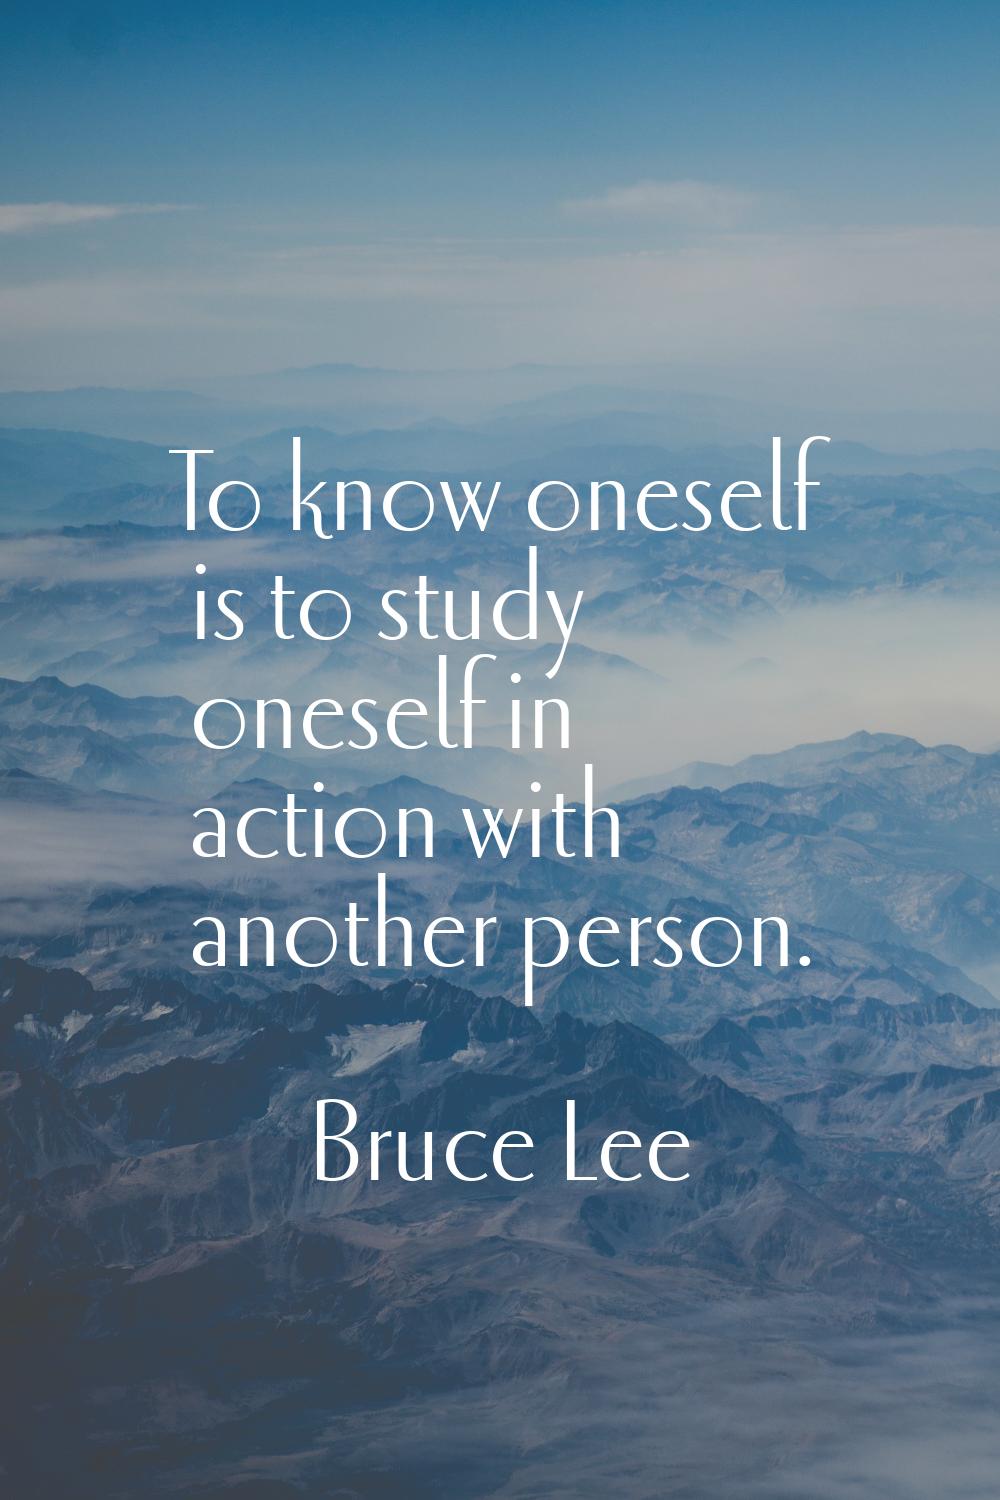 To know oneself is to study oneself in action with another person.